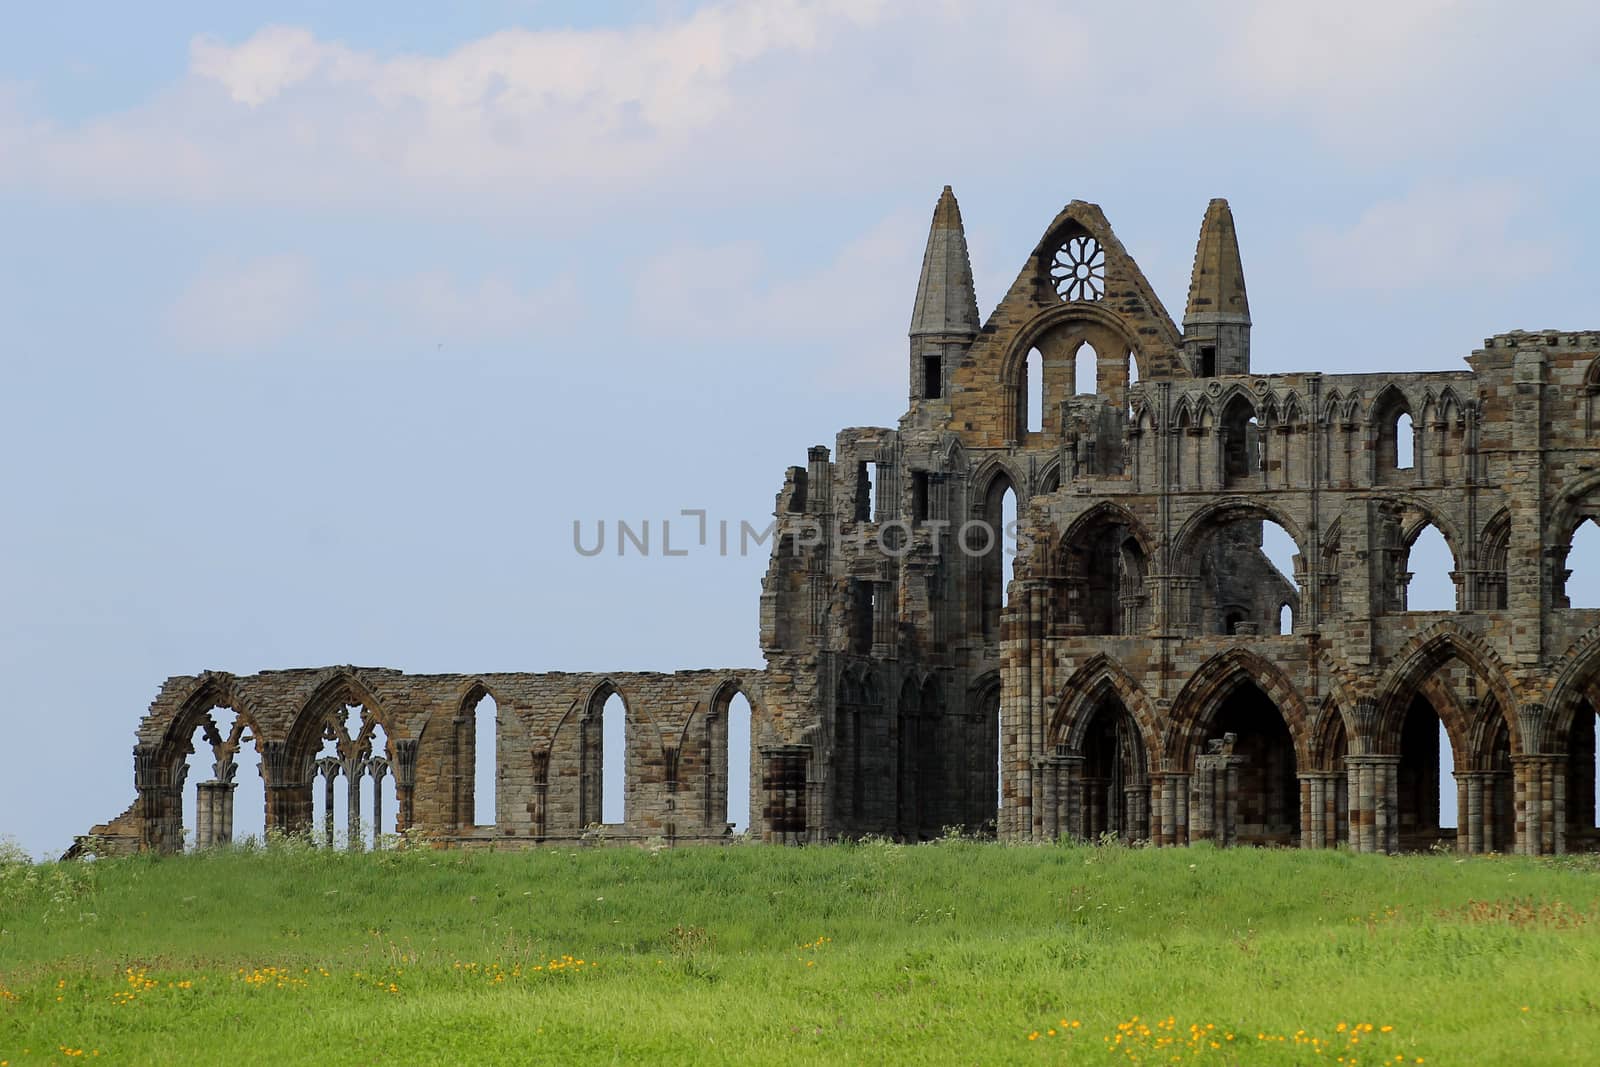 Scenic view of Whitby Abbey, North Yorkshire, England.